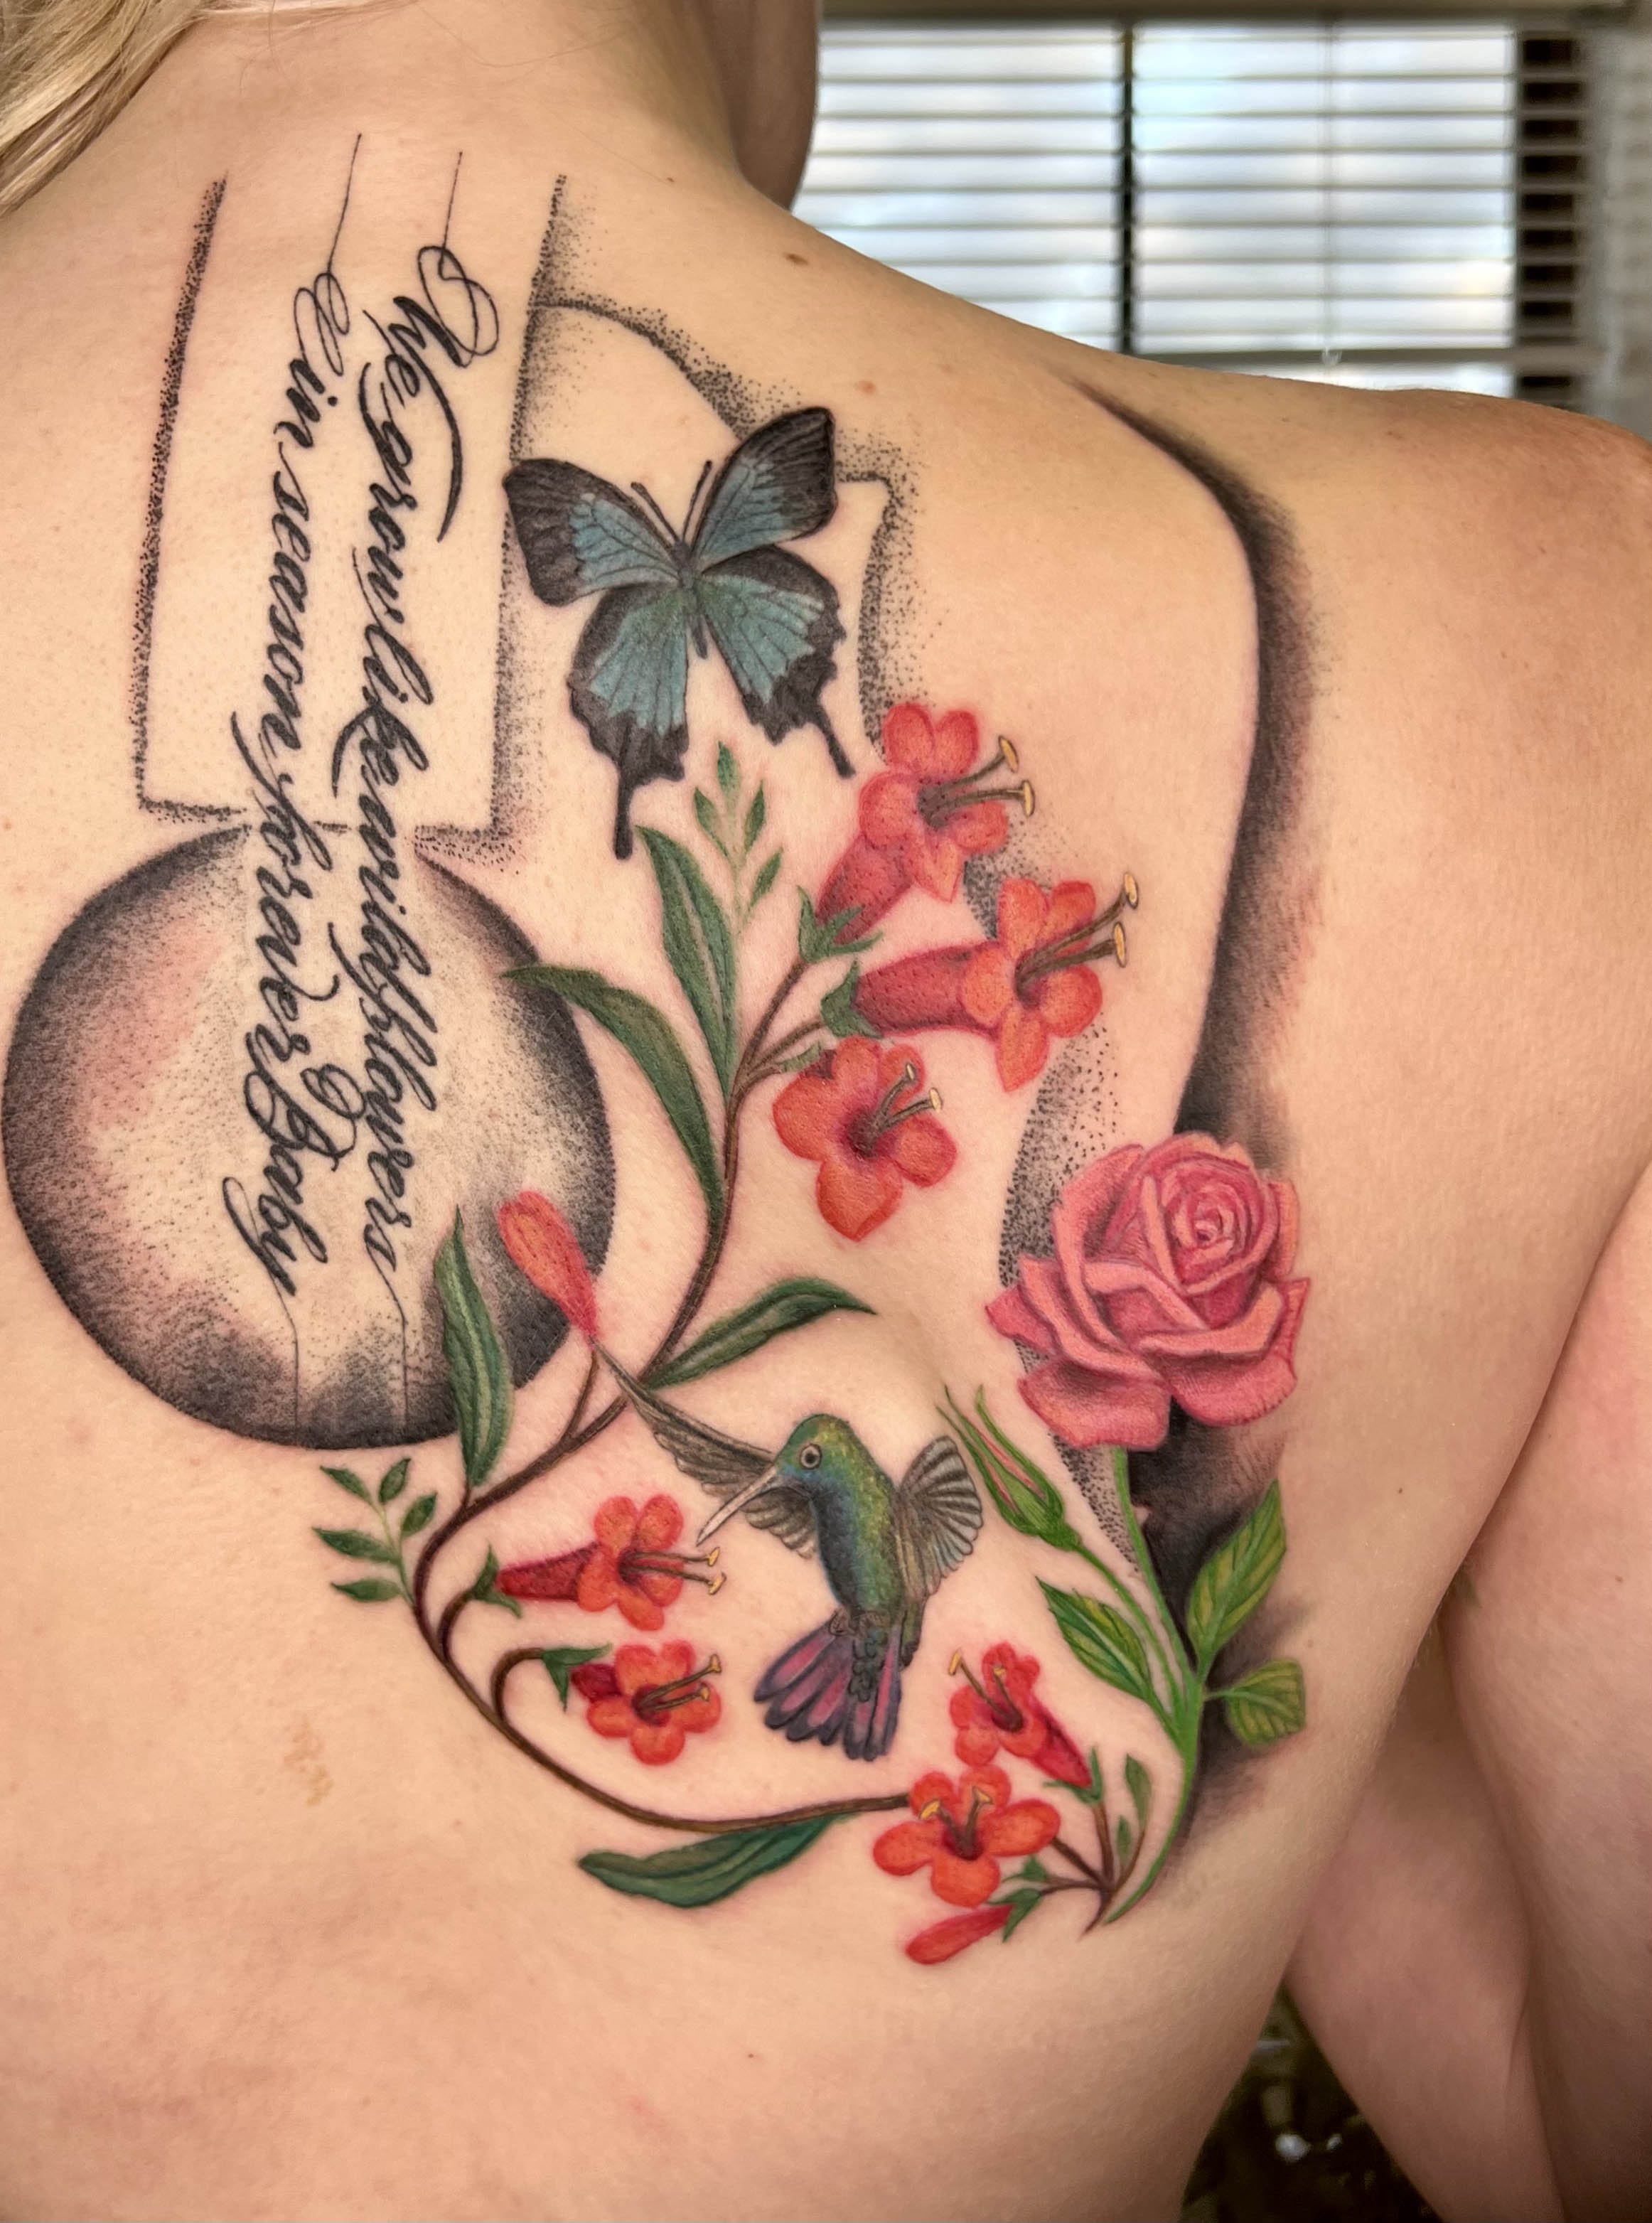  Color tattoo of flowers that make a design on a silhouette of a Gibson guitar with song lyrics on the neck of the guitar.  done on the back of a slender person with pink undertones. Feminine shape.  